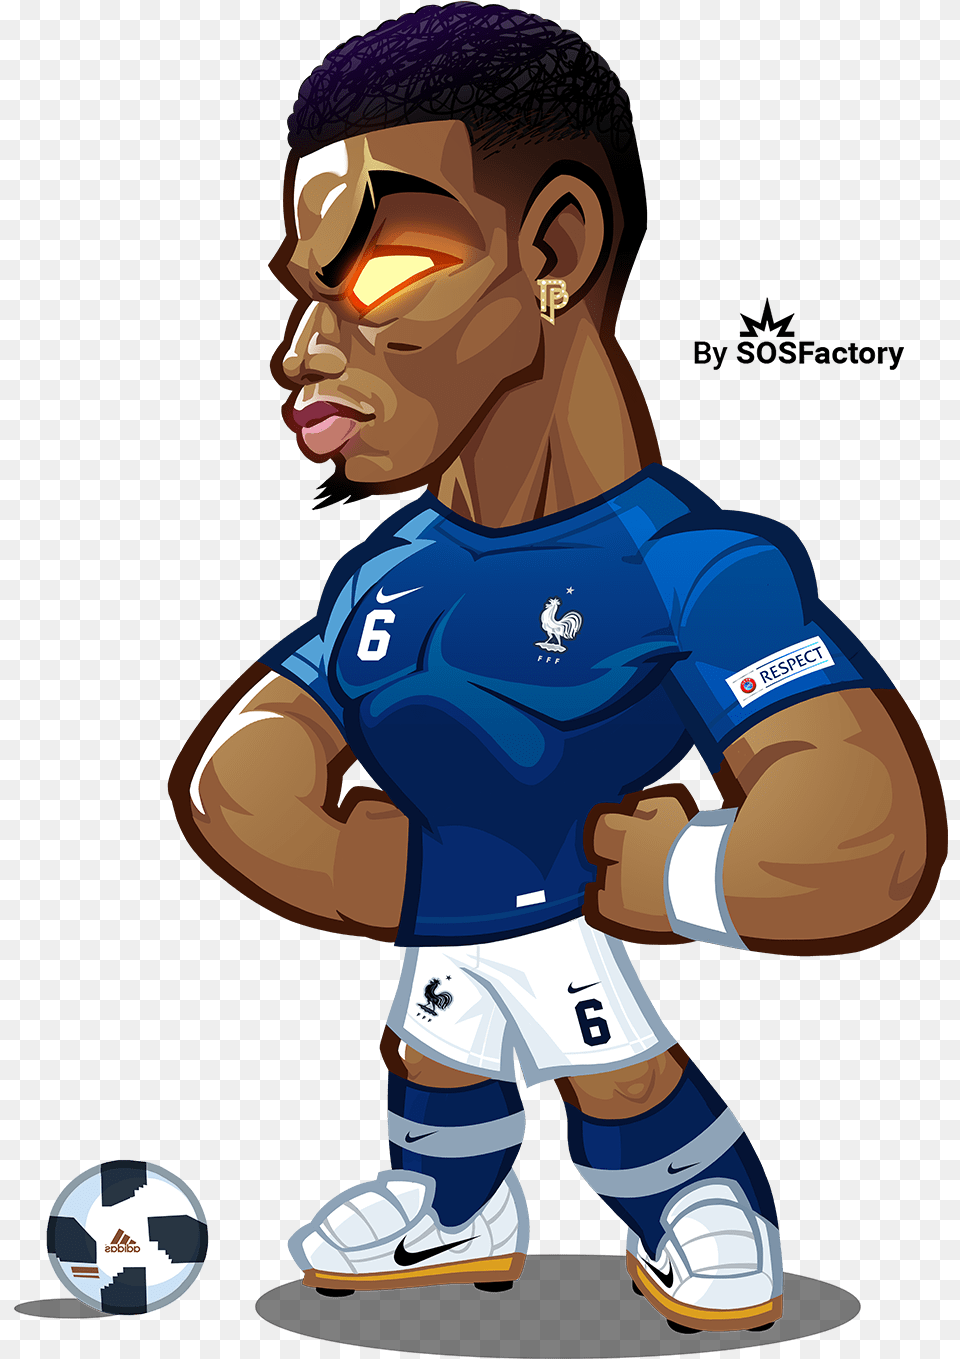 Worldcup Russia Mascotization Project Paul Pogba Caricature World Cup Russia 2018 Mascotization Project, Ball, Soccer Ball, Soccer, Sport Free Png Download